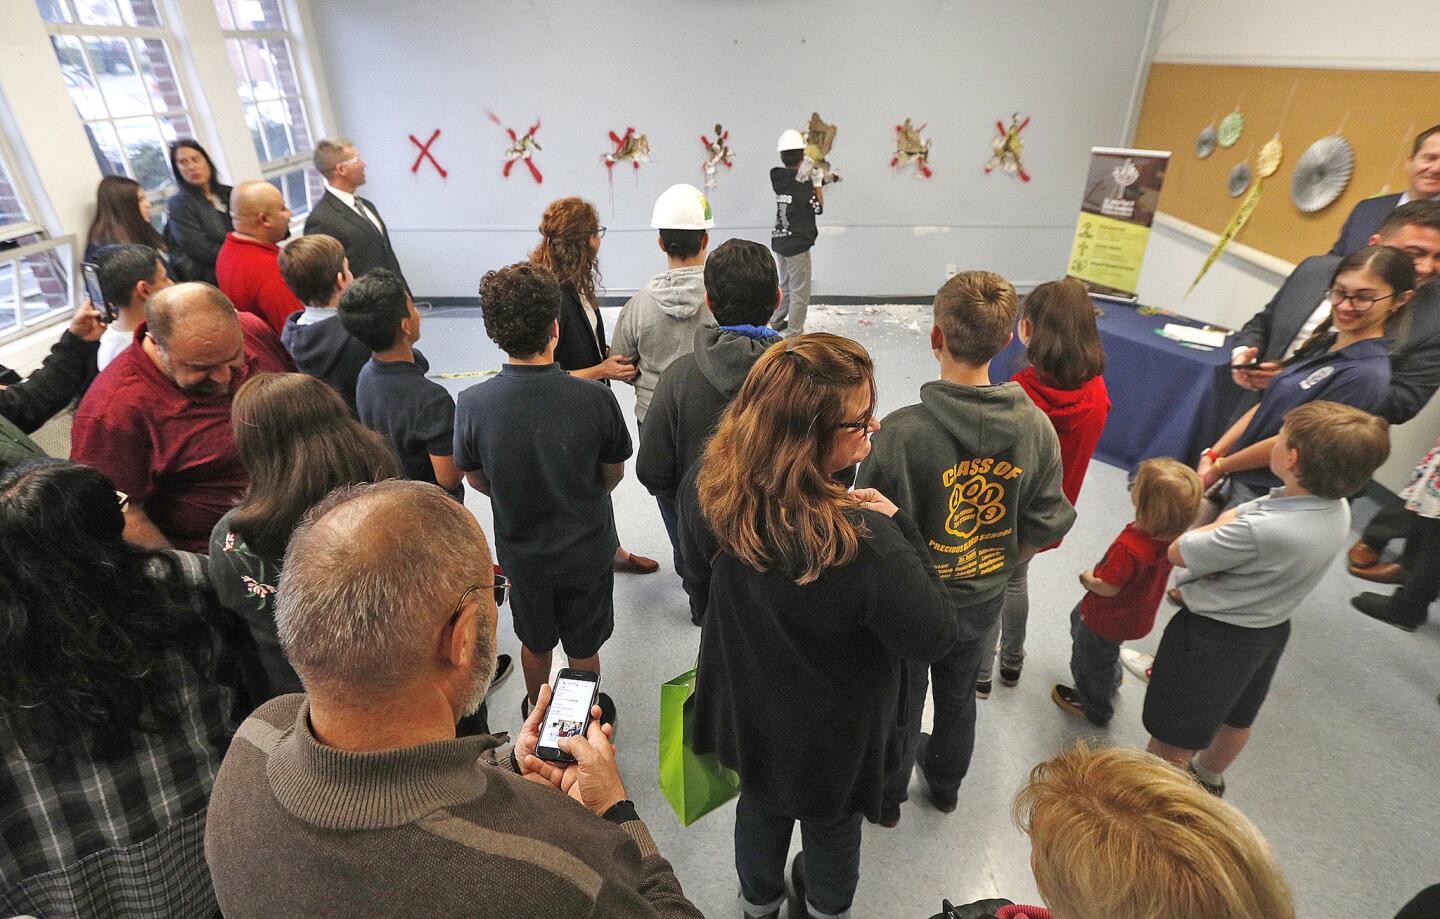 Parents and guests to the school watch the first new students to the school swing a sledge hammer into a wall labeled for demolition on the first day inside the St. John Paul II STEM Academy at Bellarmine-Jefferson, a new Roman Catholic high school in Burbank on Monday, March 4, 2019. The school will open to a small class of freshman in the Fall, focussing on science, technology, engineering, and math.